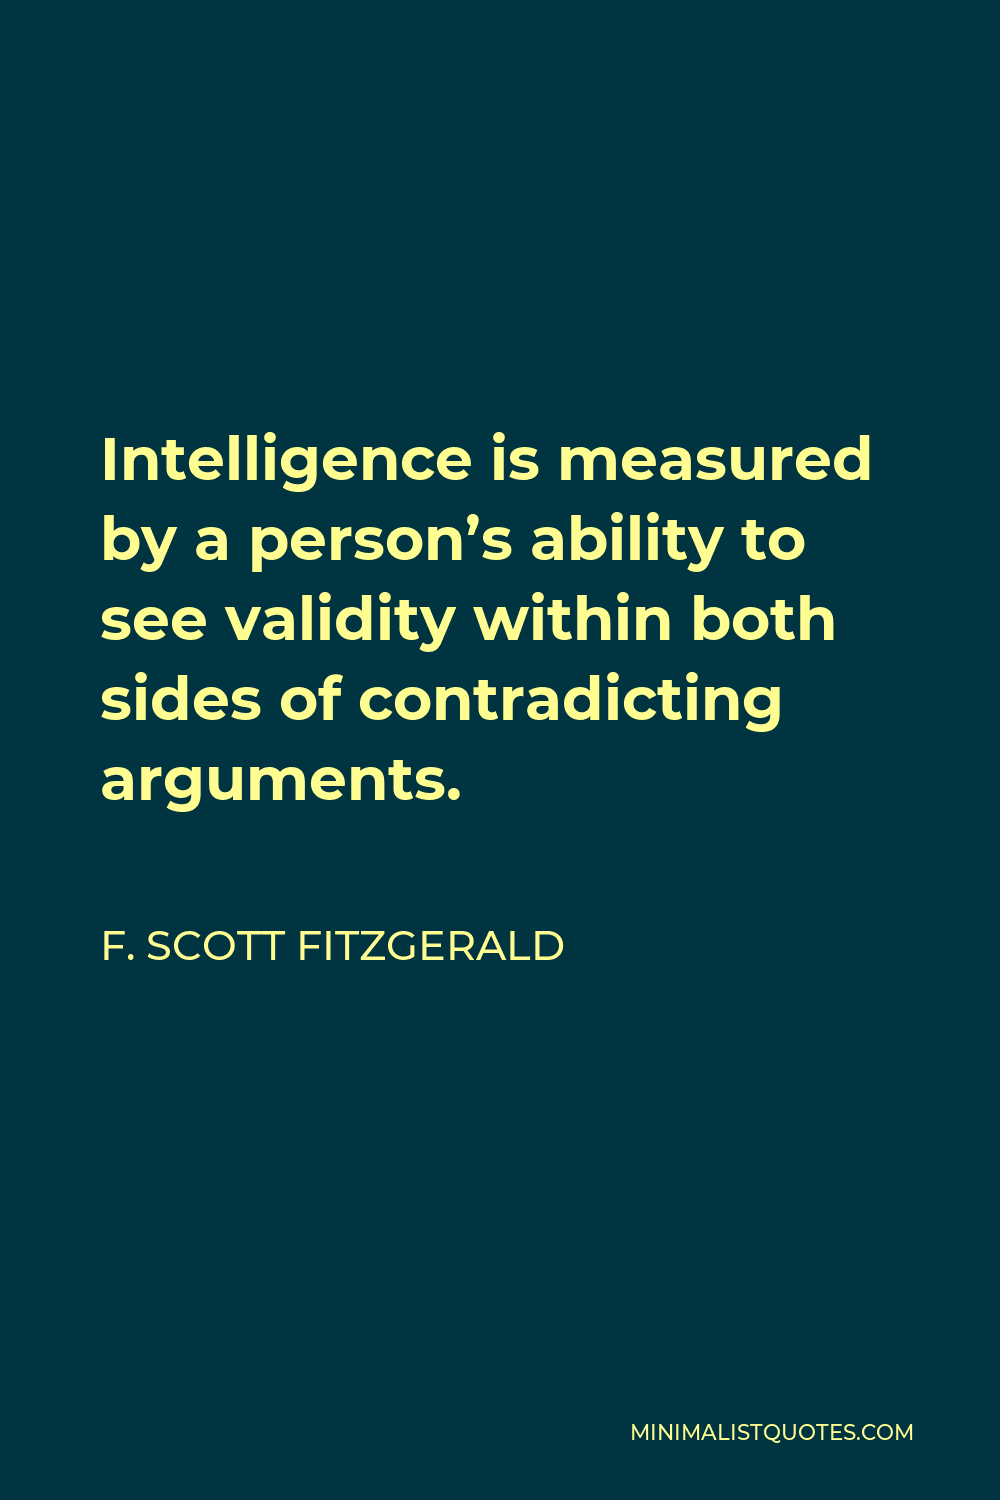 F. Scott Fitzgerald Quote - Intelligence is measured by a person’s ability to see validity within both sides of contradicting arguments.